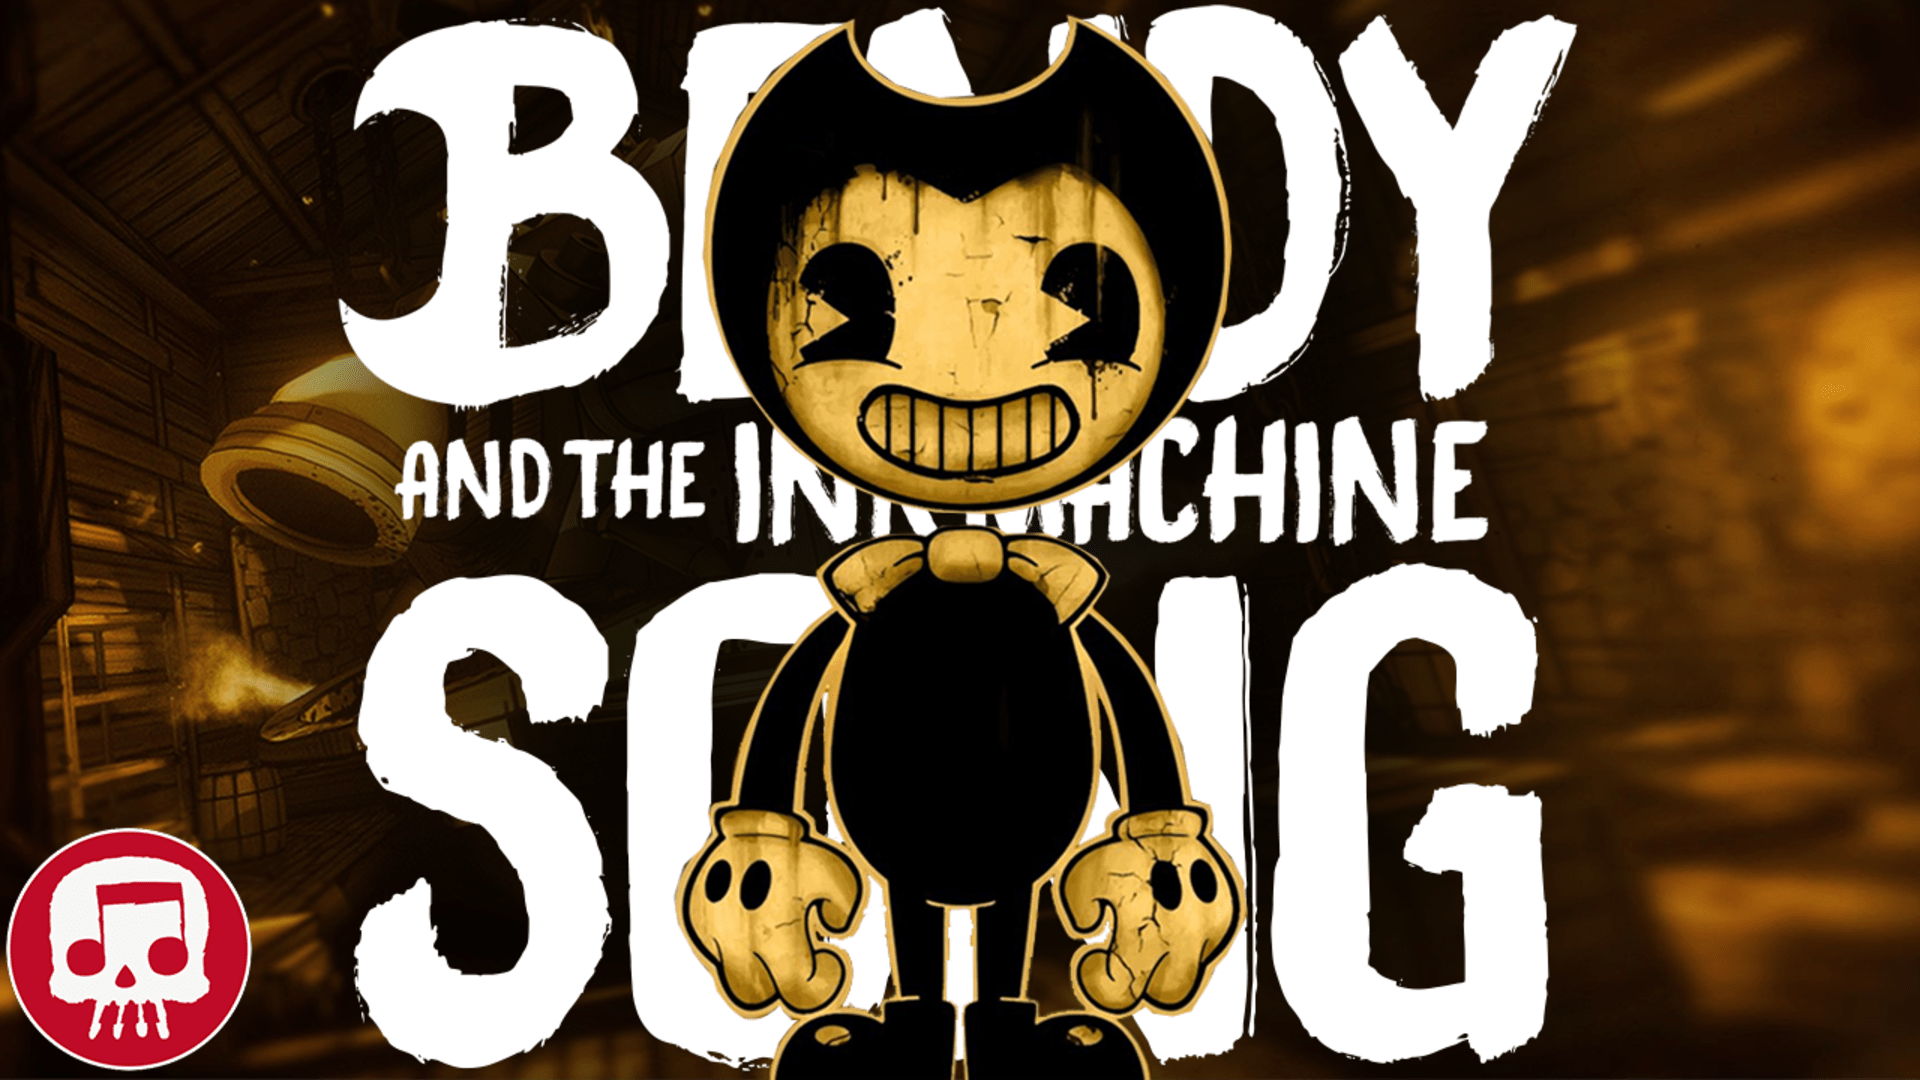 Bendy and the Ink Machine Song - Can't Be Erased - Rooster Teeth